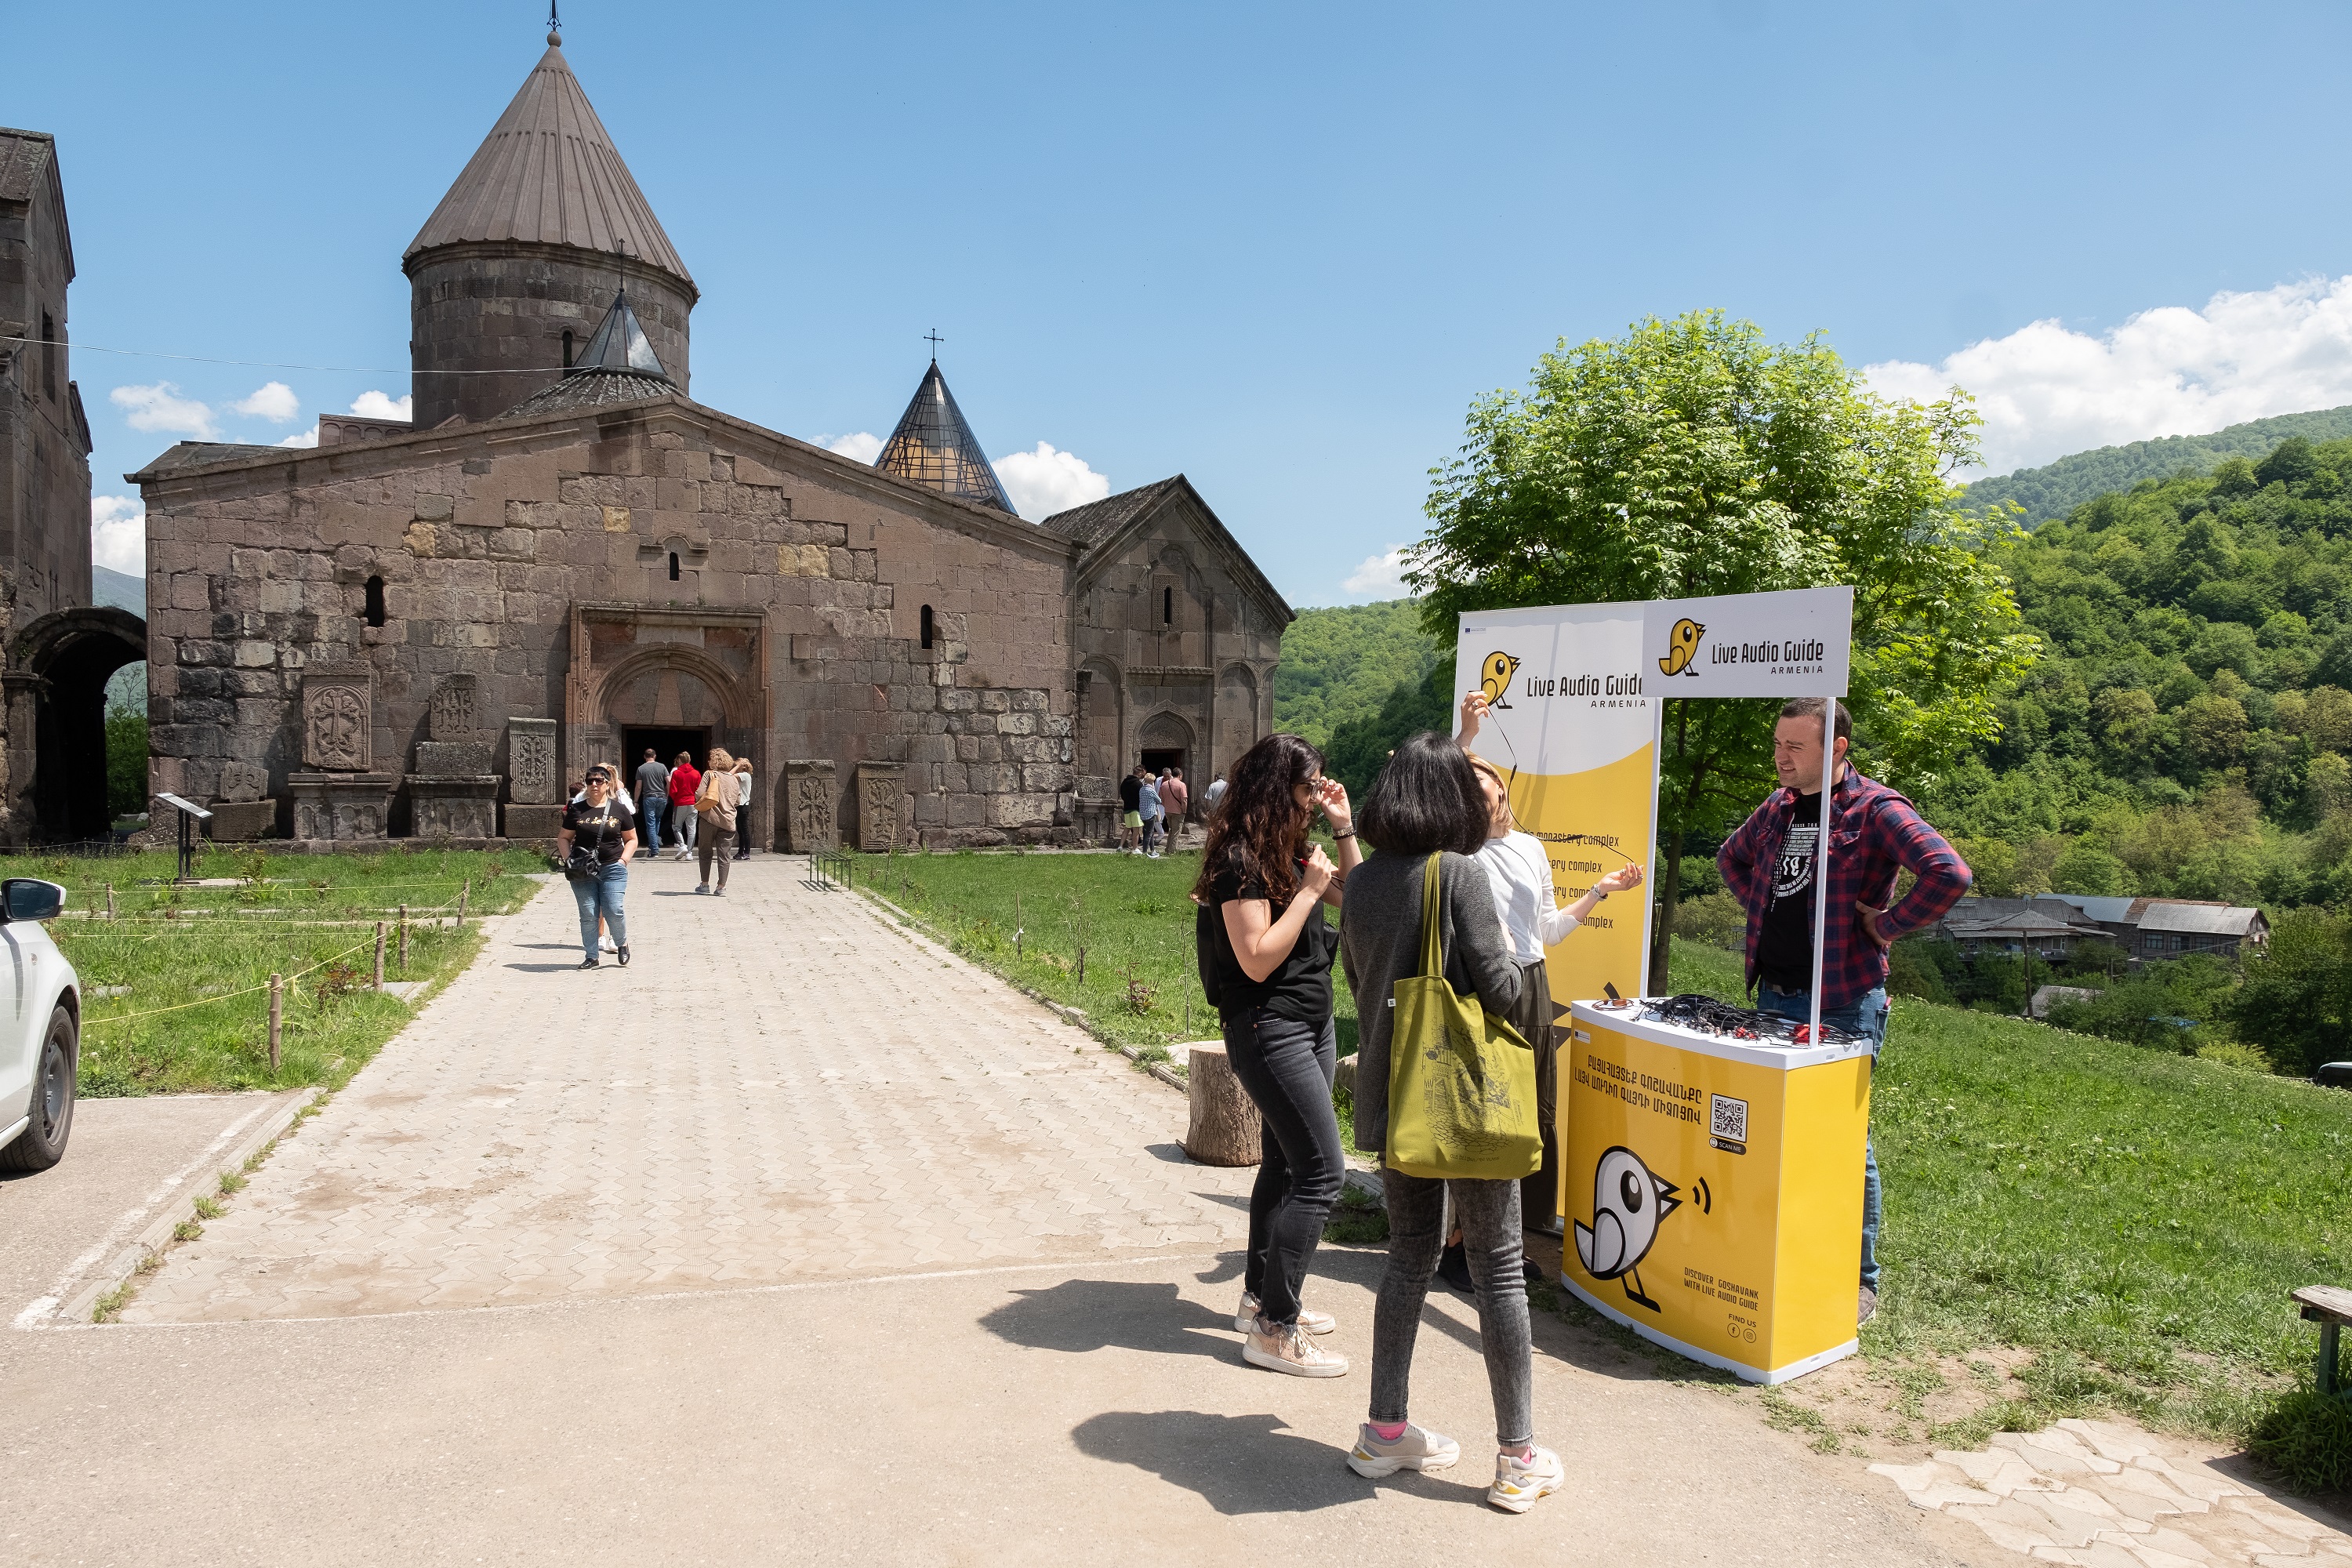 At Goshavank Monastery in Tavush Province in north-eastern Armenia, audio guides are available for visitors.